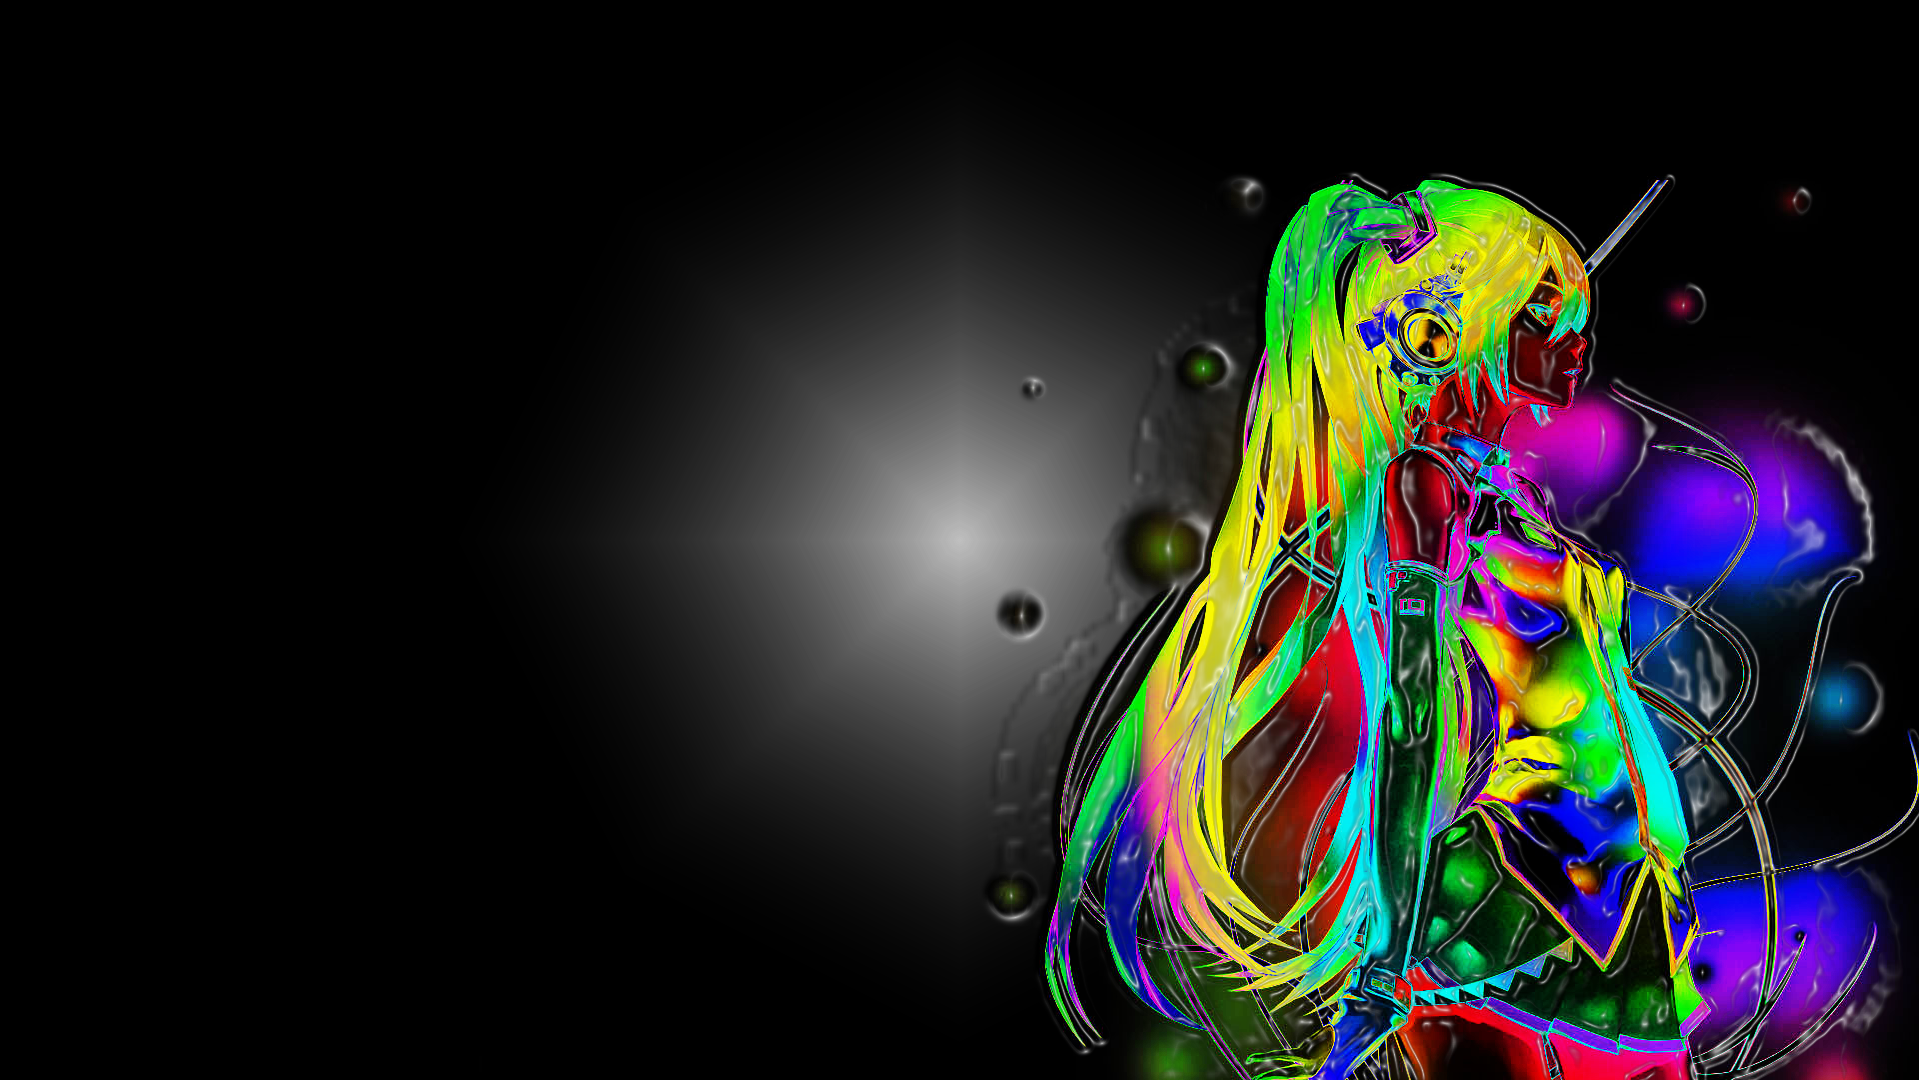 Anime Neon In 3D Wallpaper And Background 1919x1080 ID400677